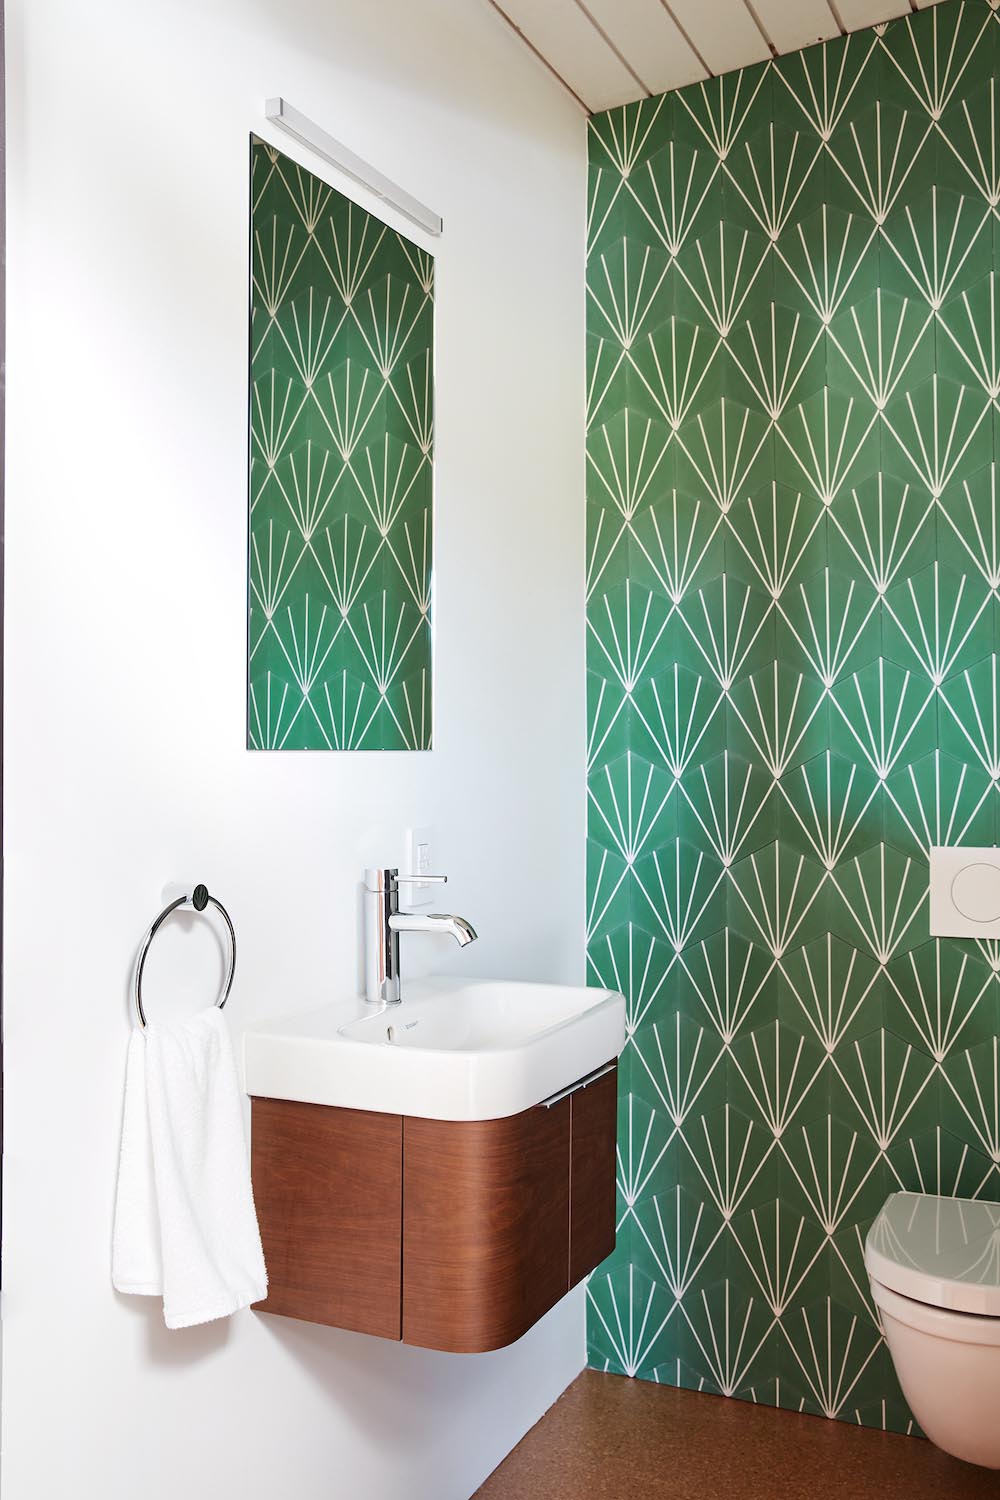 A modern white bathroom with green starburst tiles and a wood vanity.